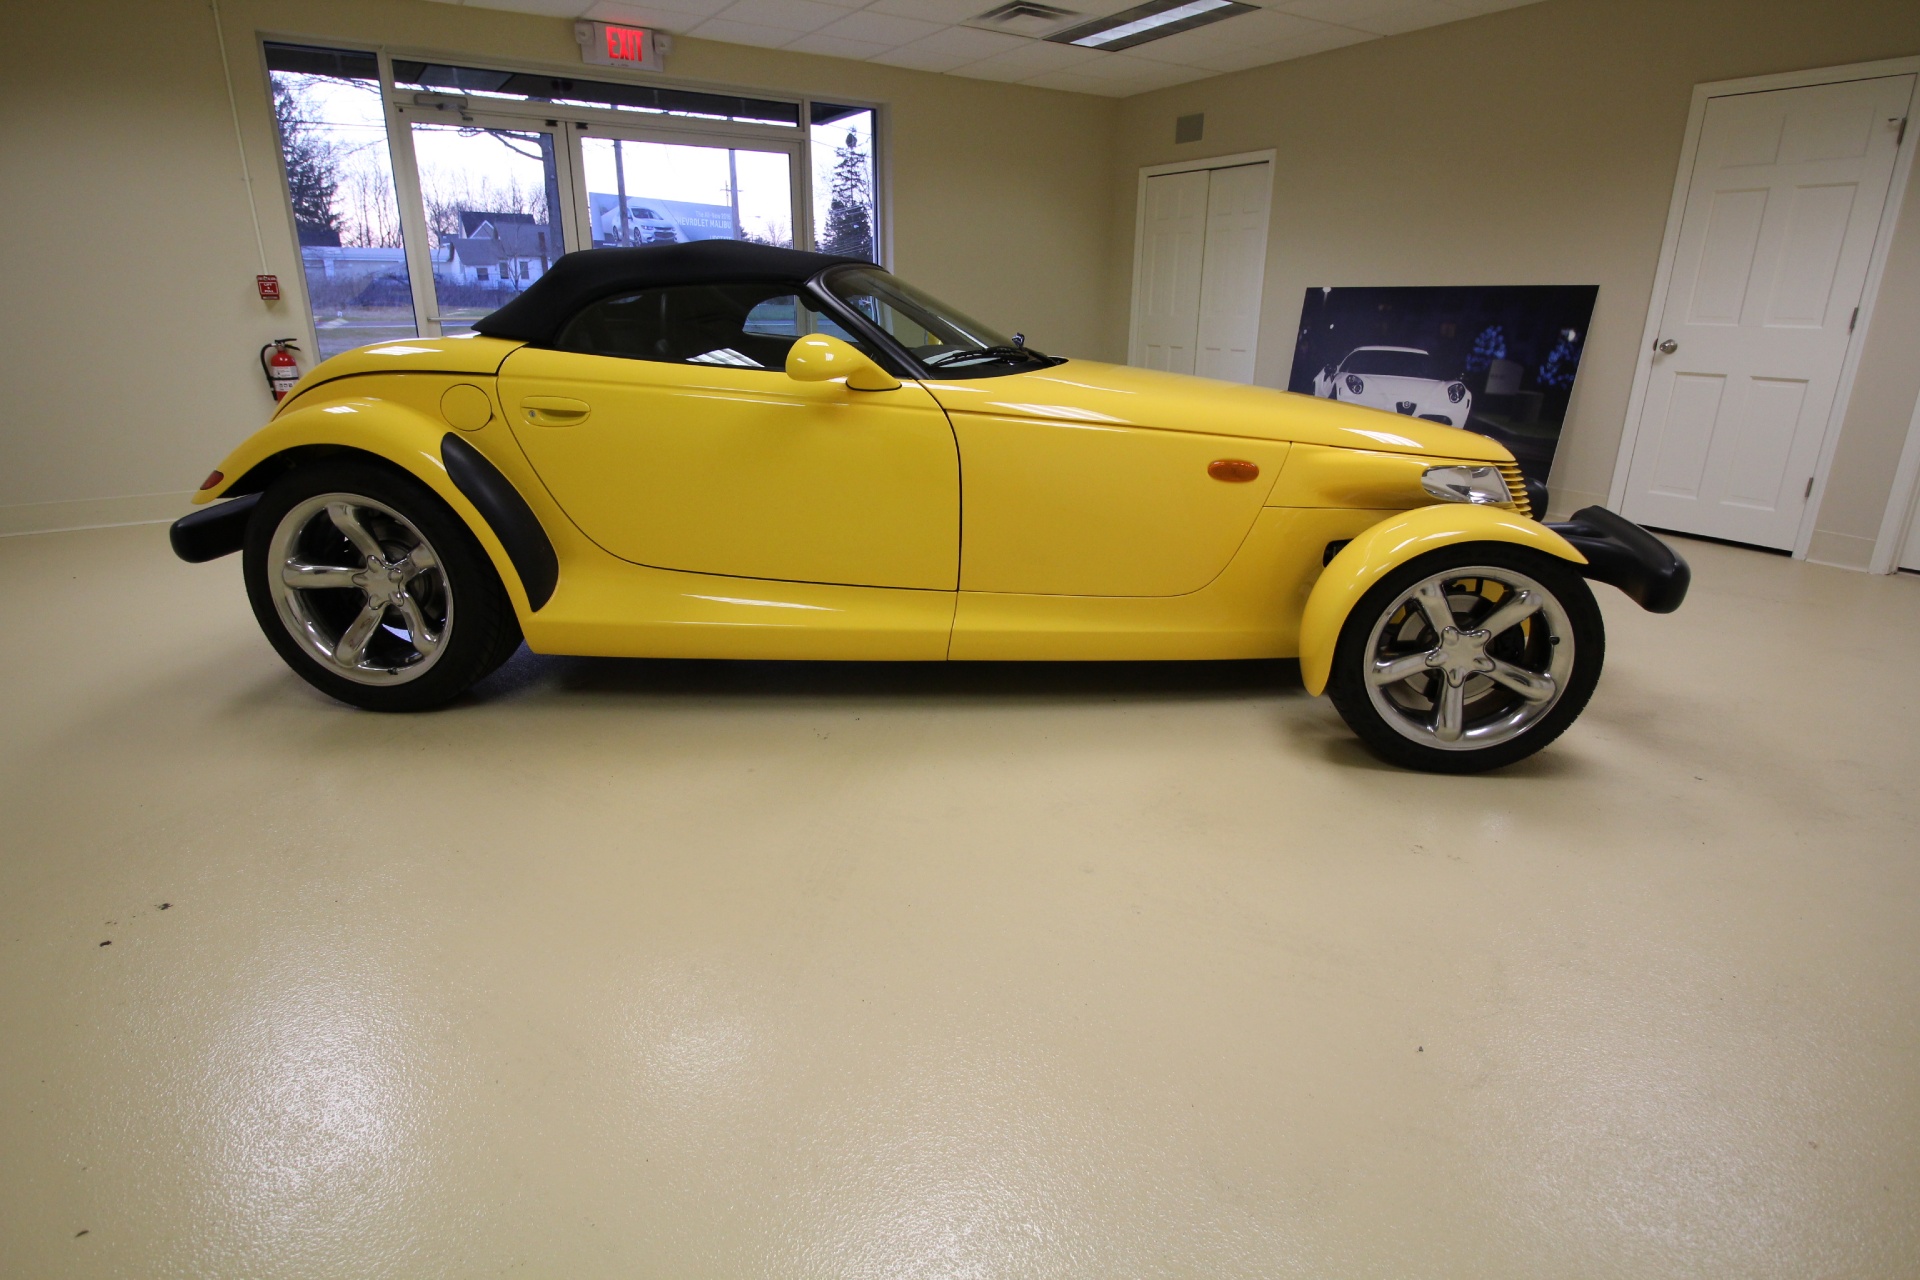 Used 2000 Yellow Plymouth Prowler 1 OWNER,LIKE NEW,LOW MILES,TIME CAPSULE | Albany, NY